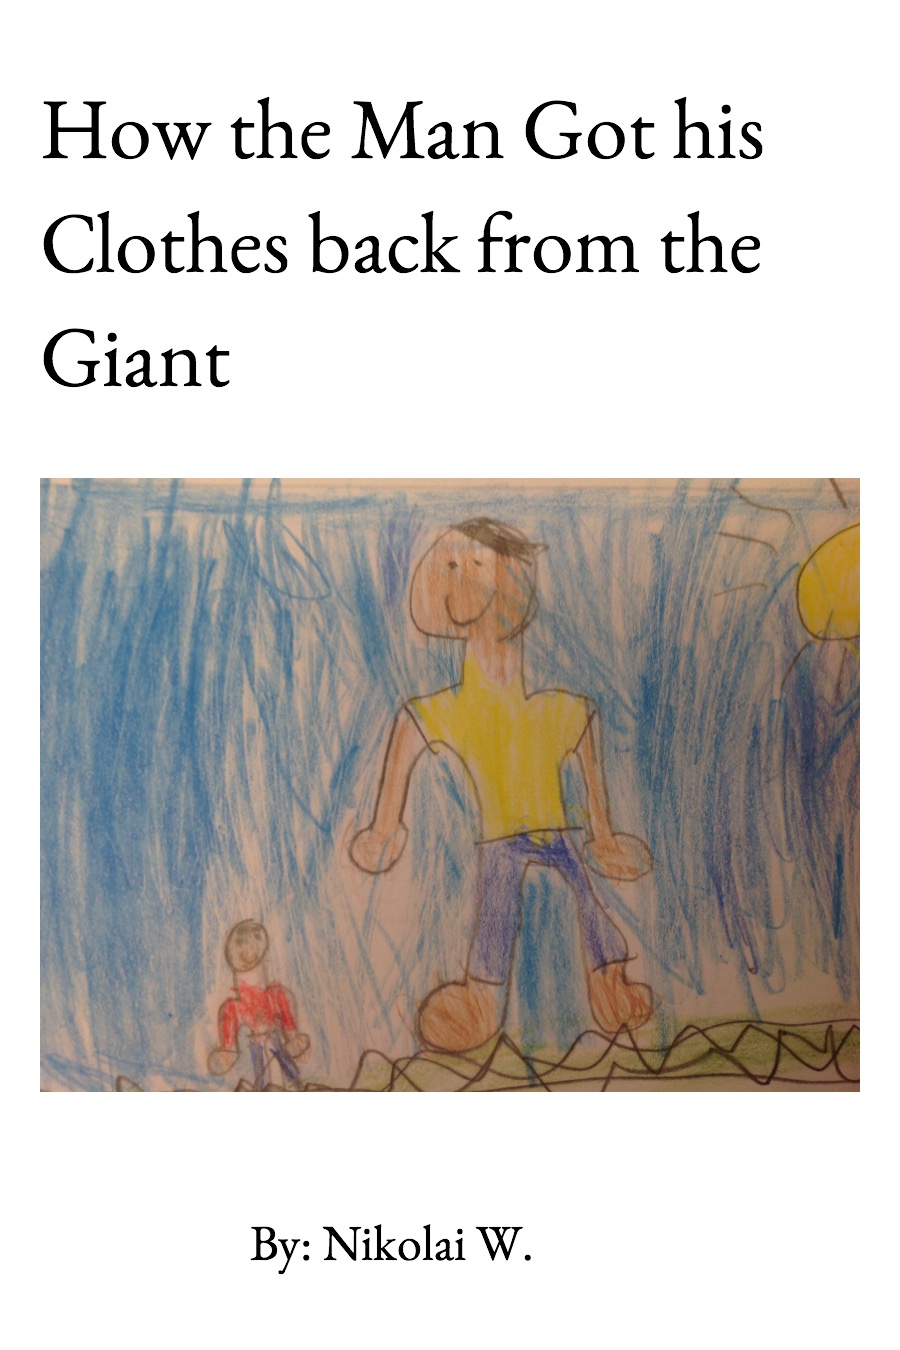 The Man Who Got His Clothes Back from the Giant by Nikolai W